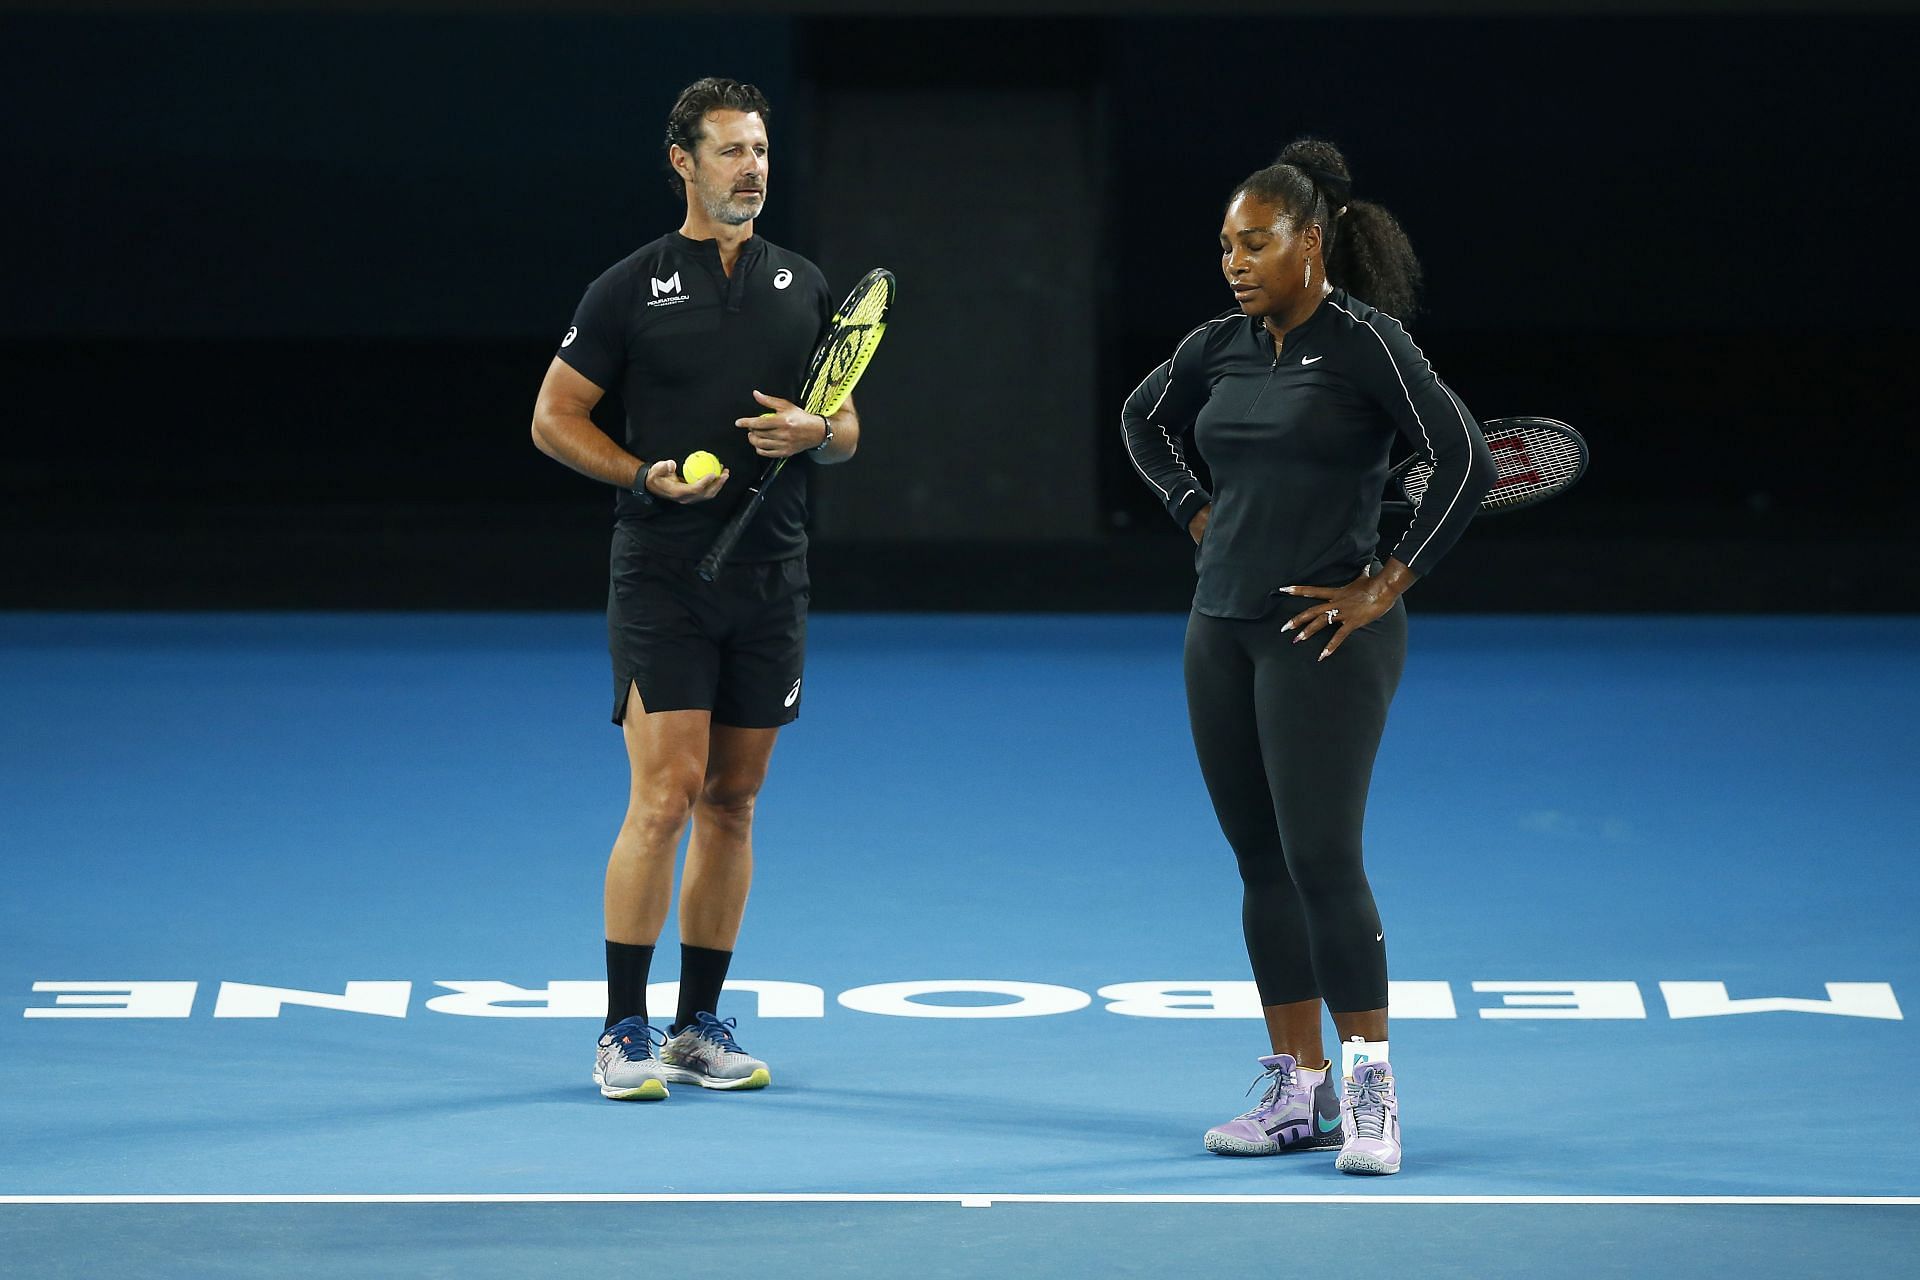 Patrick Mouratoglou (L) with Serena Williams at the 2020 Australian Open